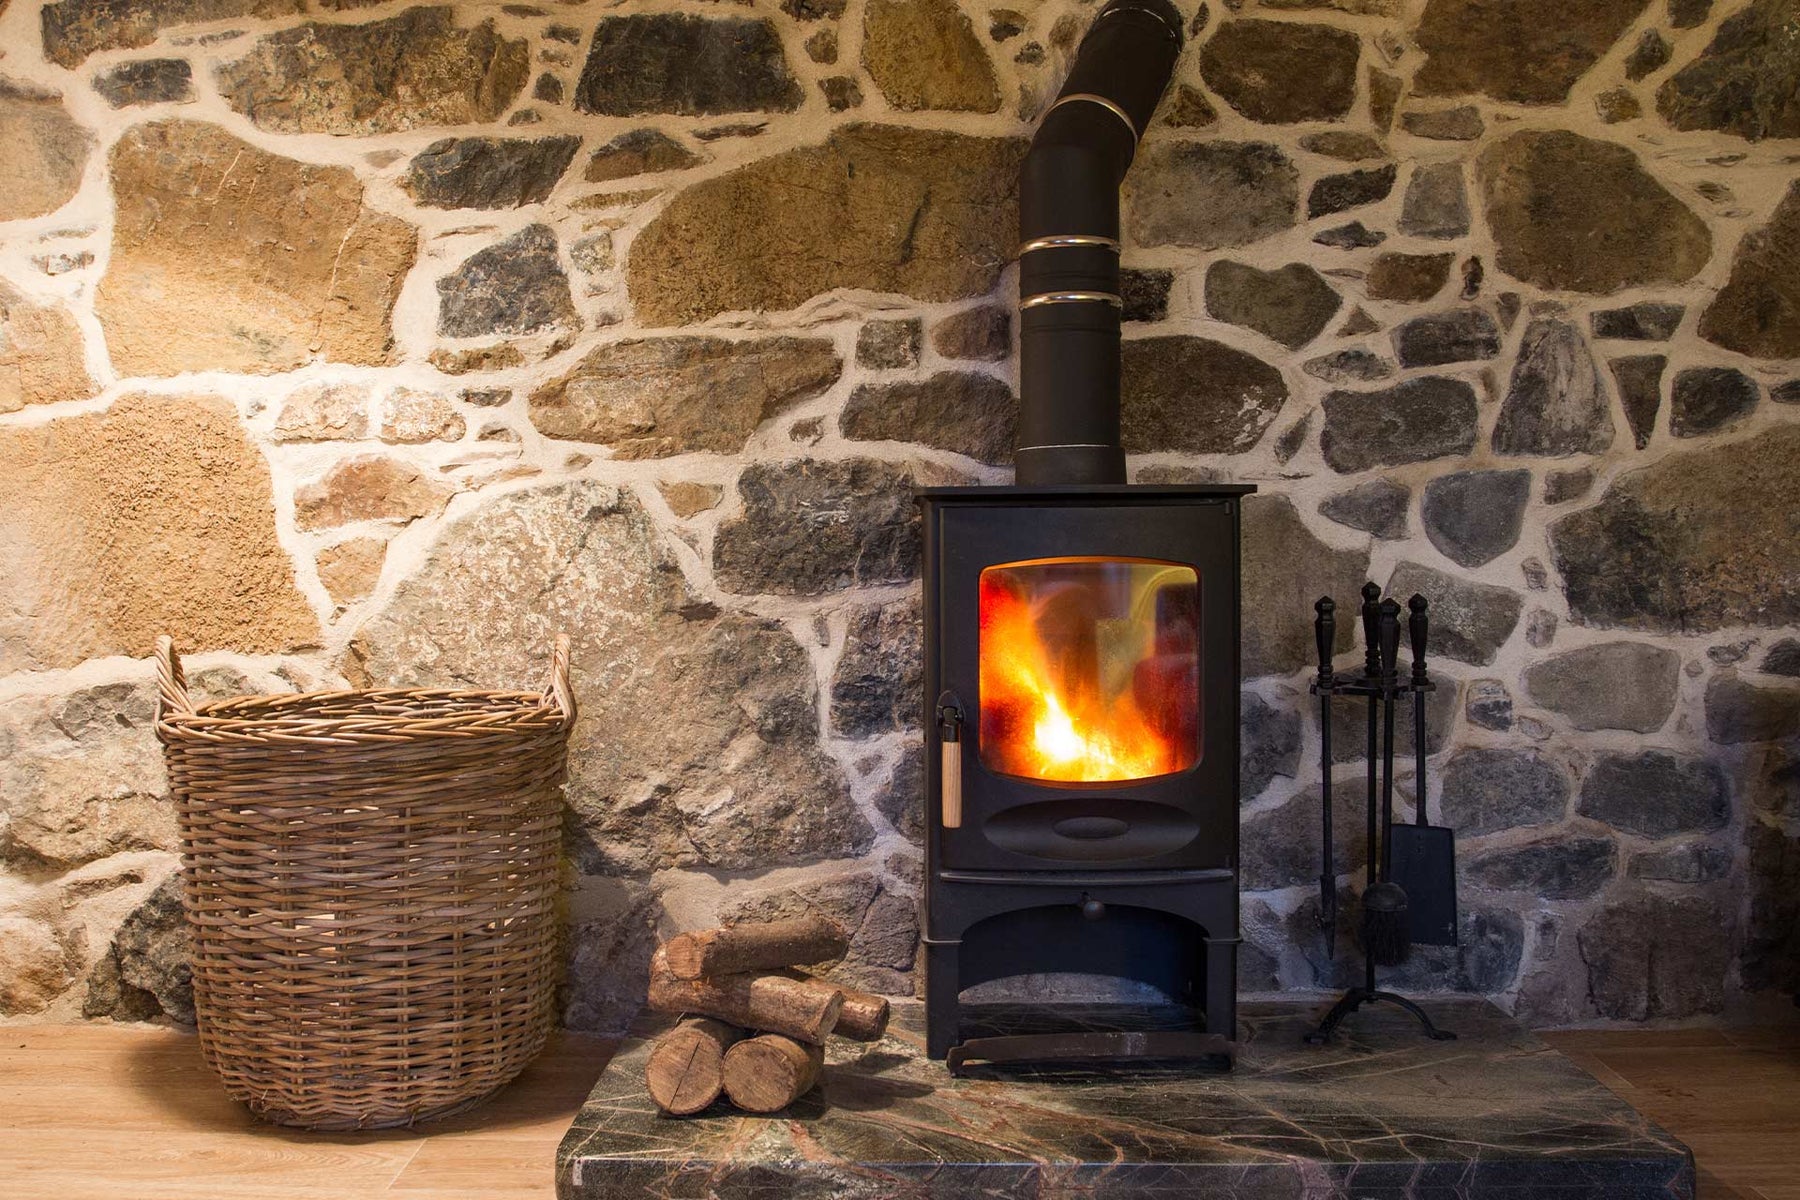 how to clean a wood burning stove